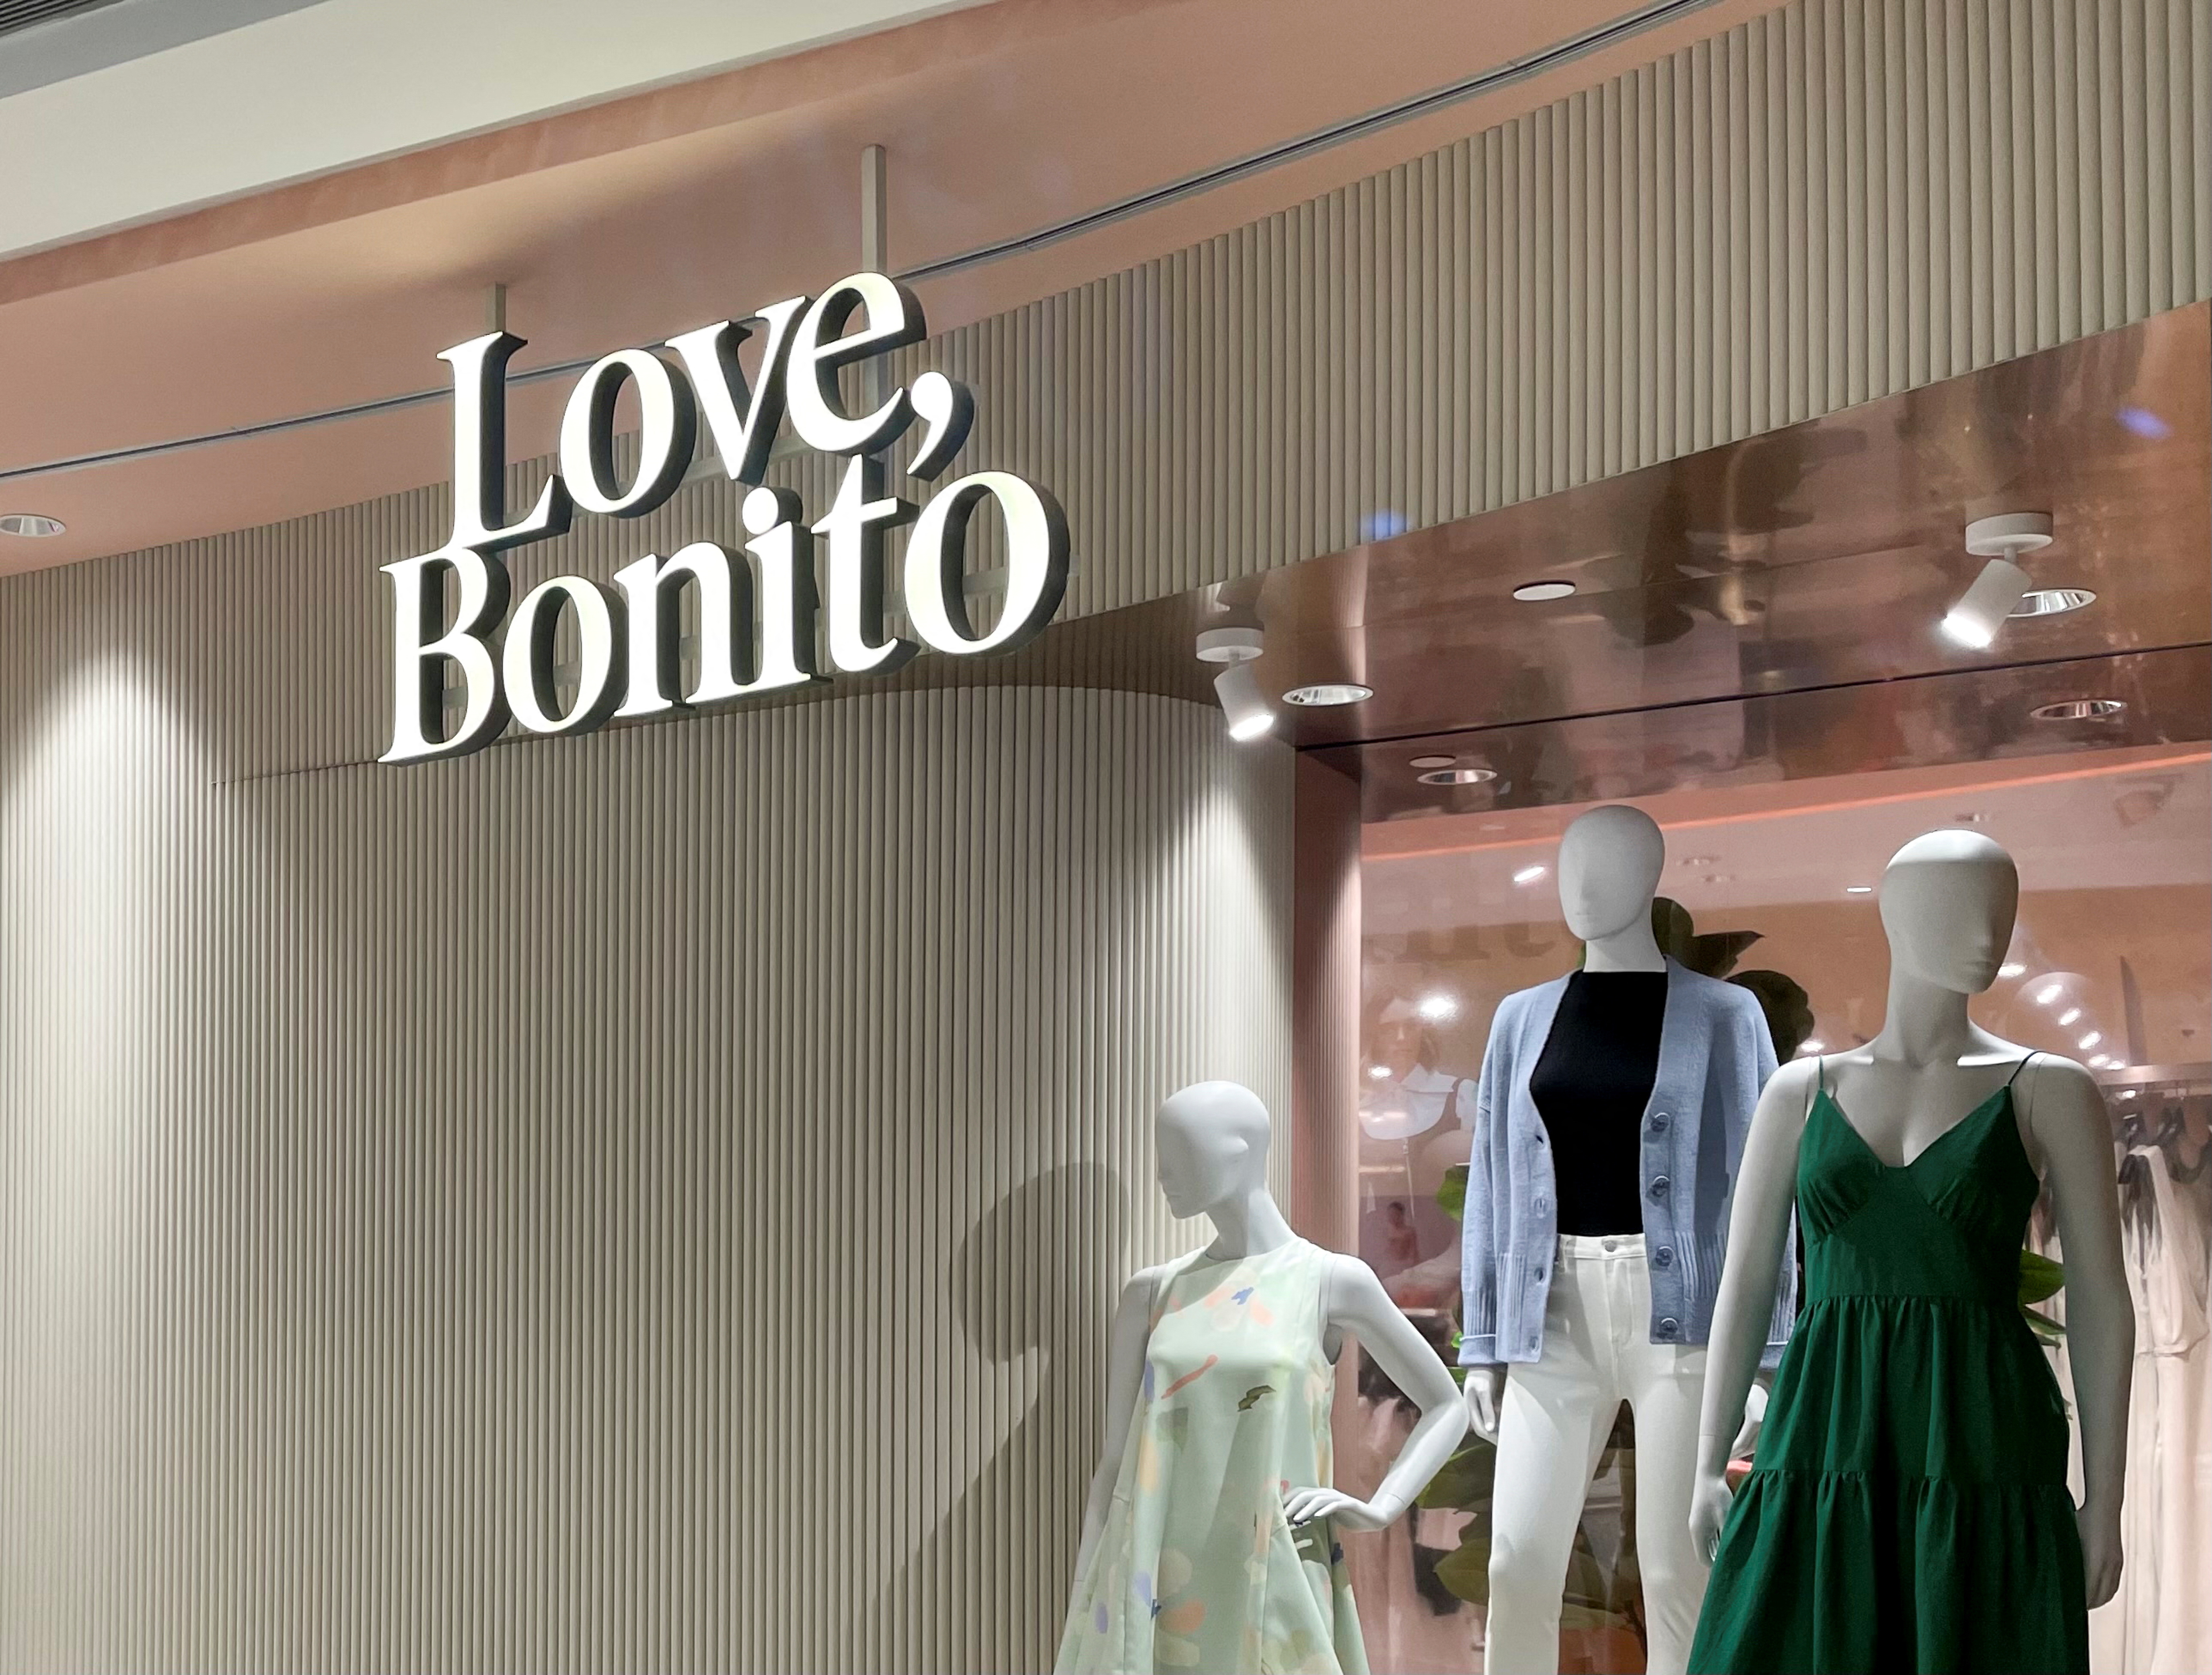 Singaporean female fashion brand Love, Bonito aiming to open first physical store in U.S.